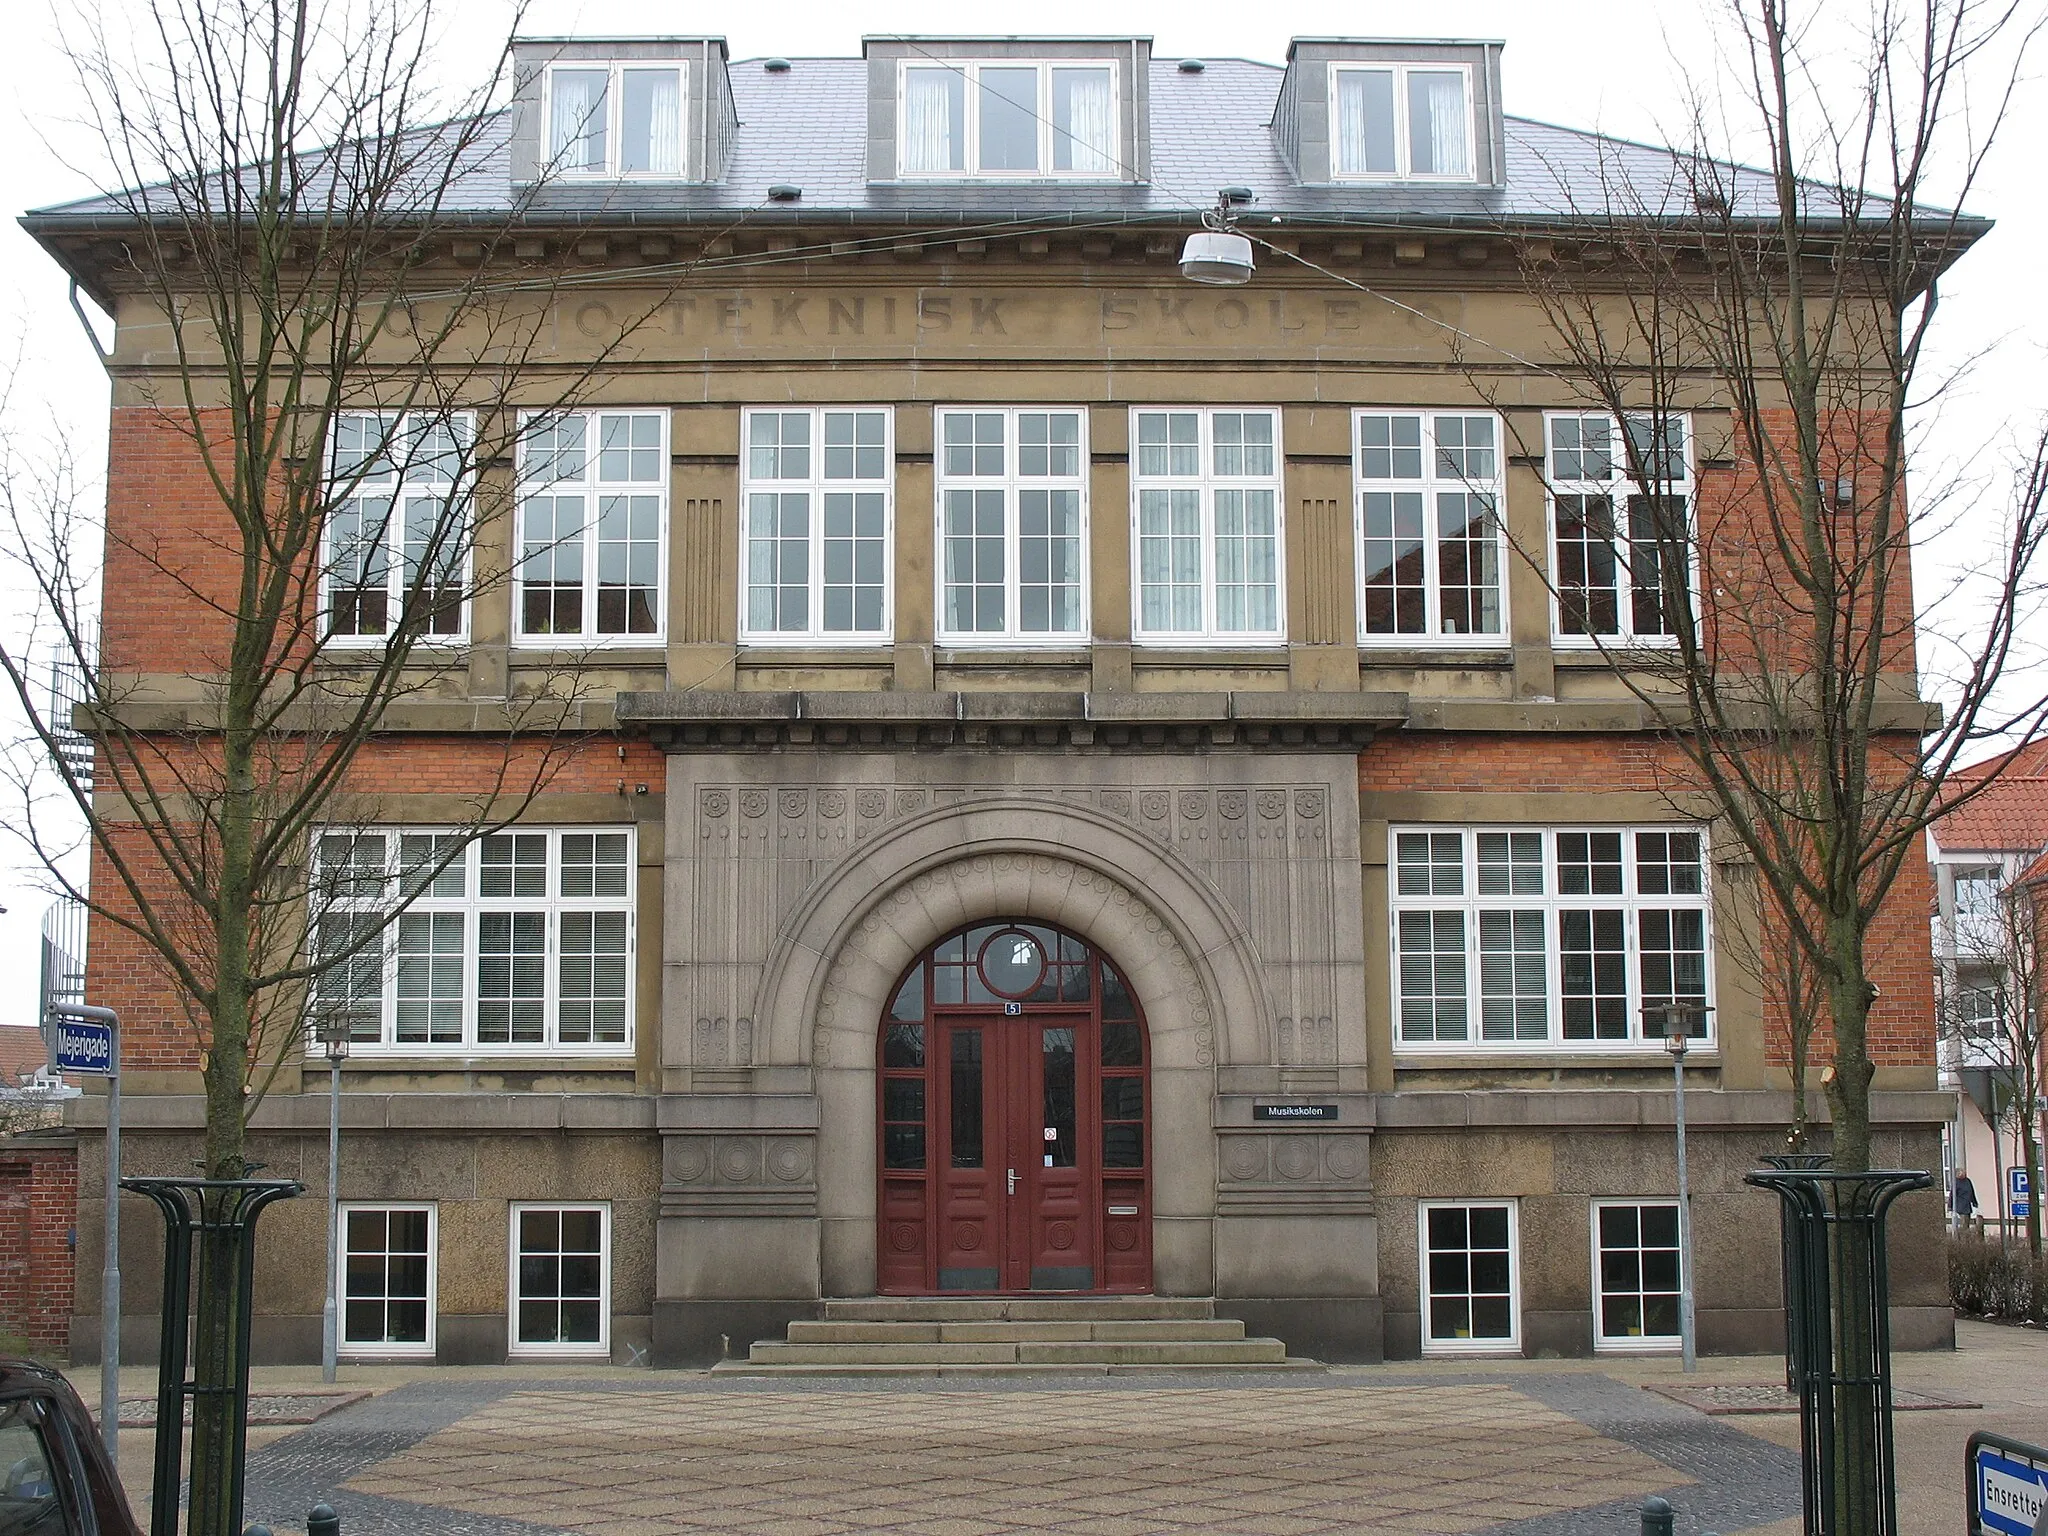 Photo showing: Former "Teknisk Skole" ("Technical School" - now a music school) in the town "Brønderslev". The town is located in North Jutland, Denmark.